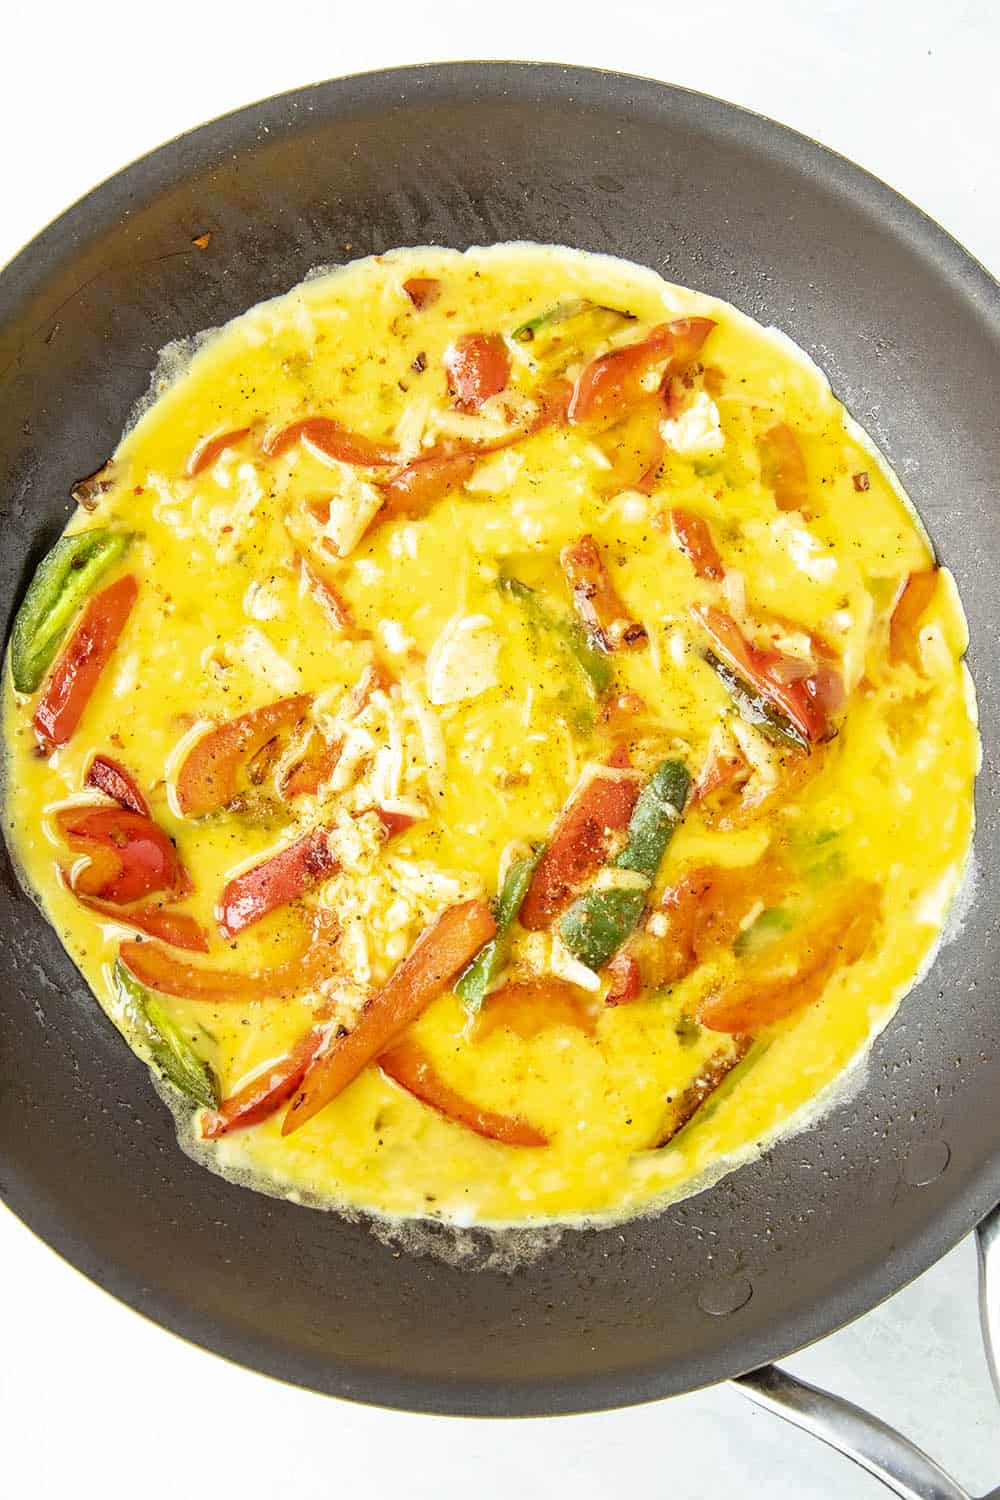 Eggs setting in a pan with lots of peppers